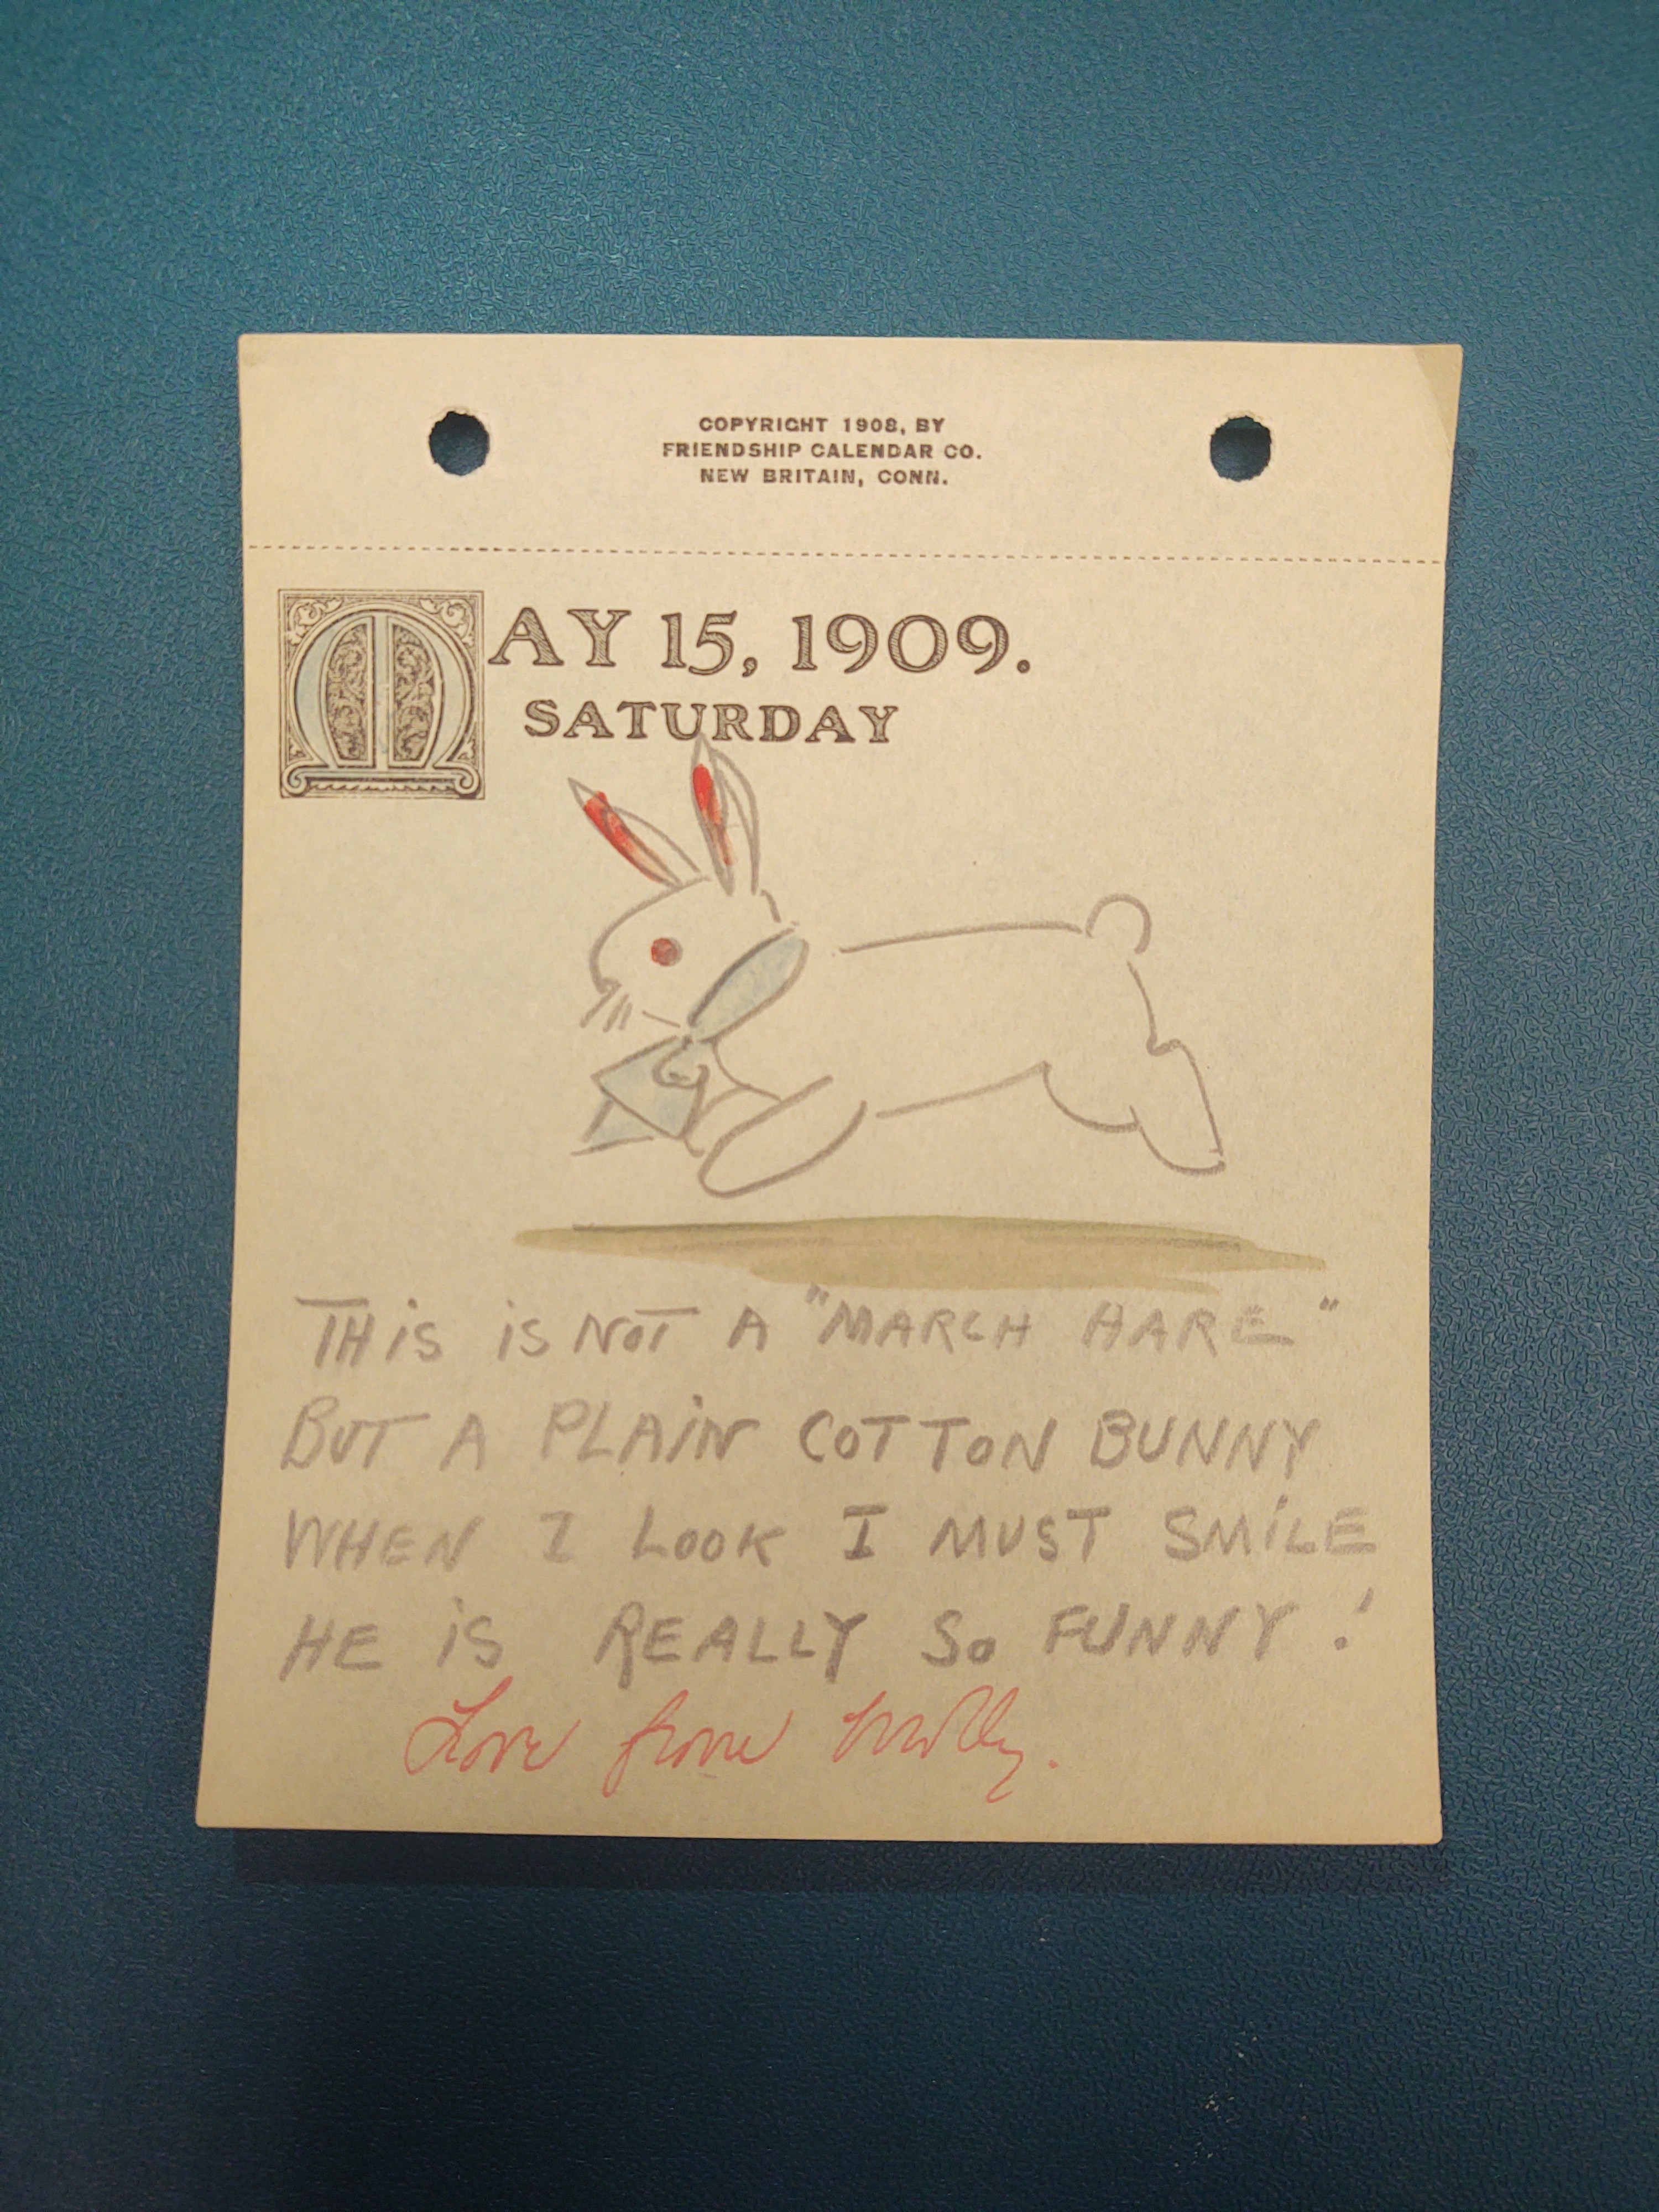 May 15, 1909. Saturday: Drawing of a bunnie that is hopping with a blue tie around its collar and red ears.